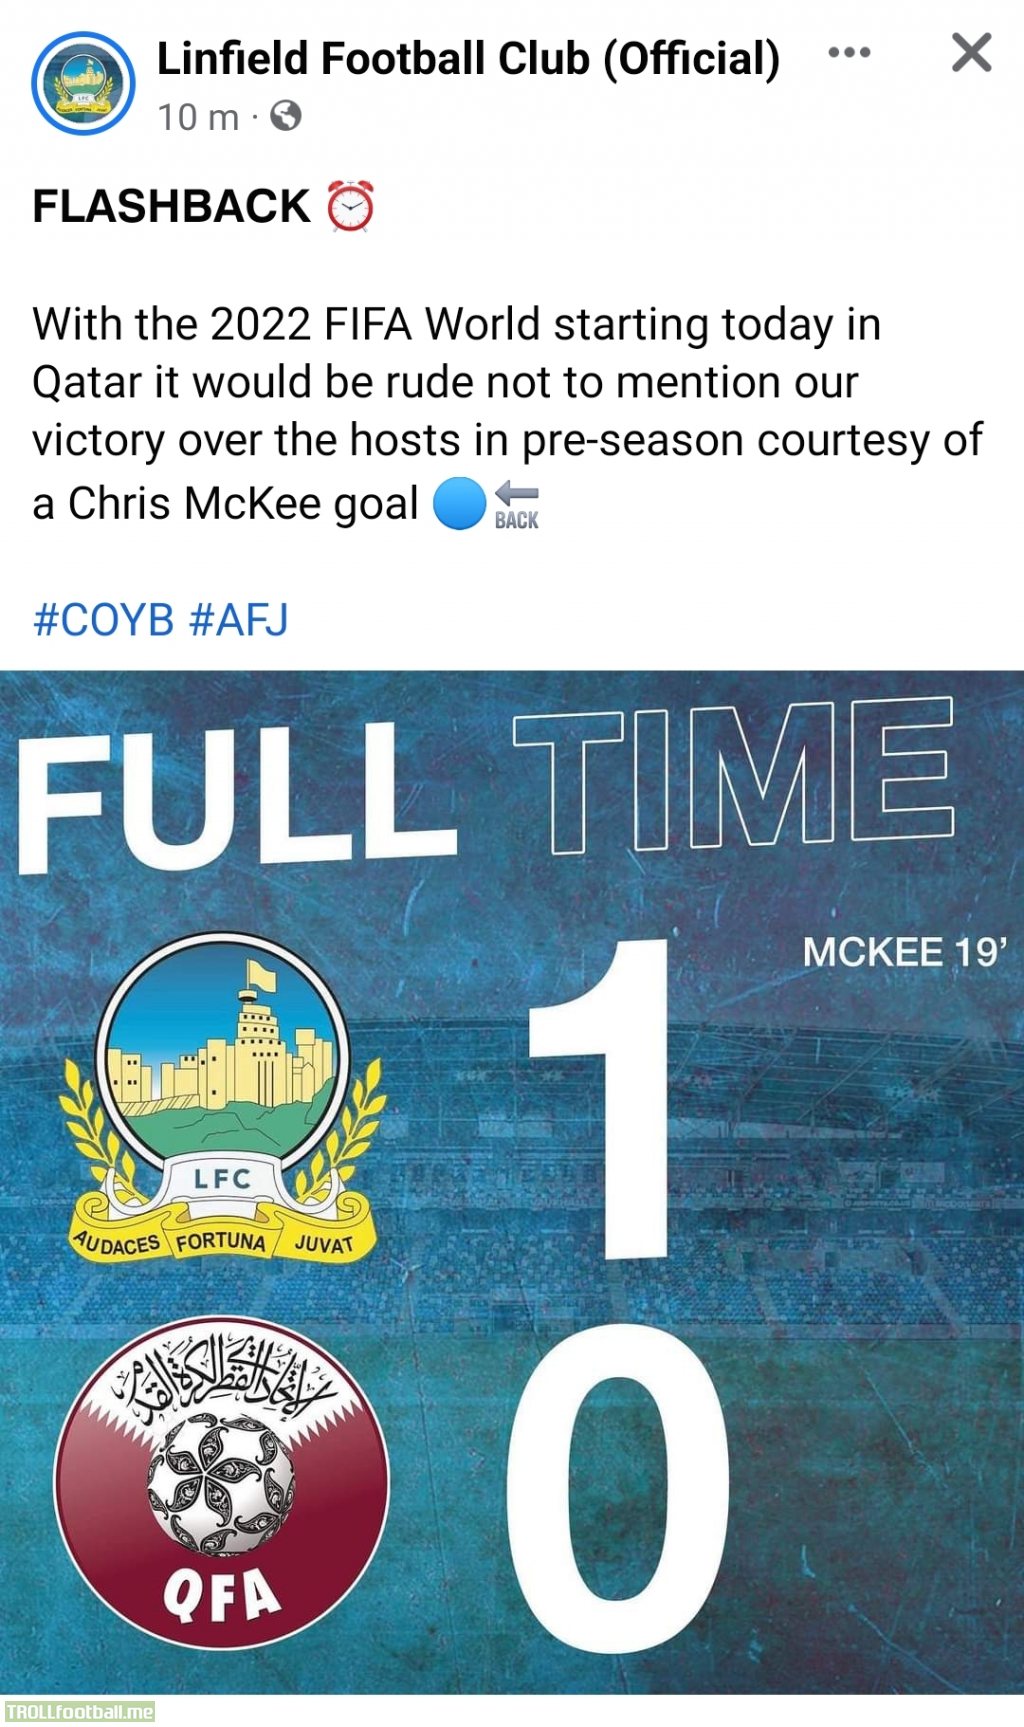 That time Qatar lost to a club from Belfast